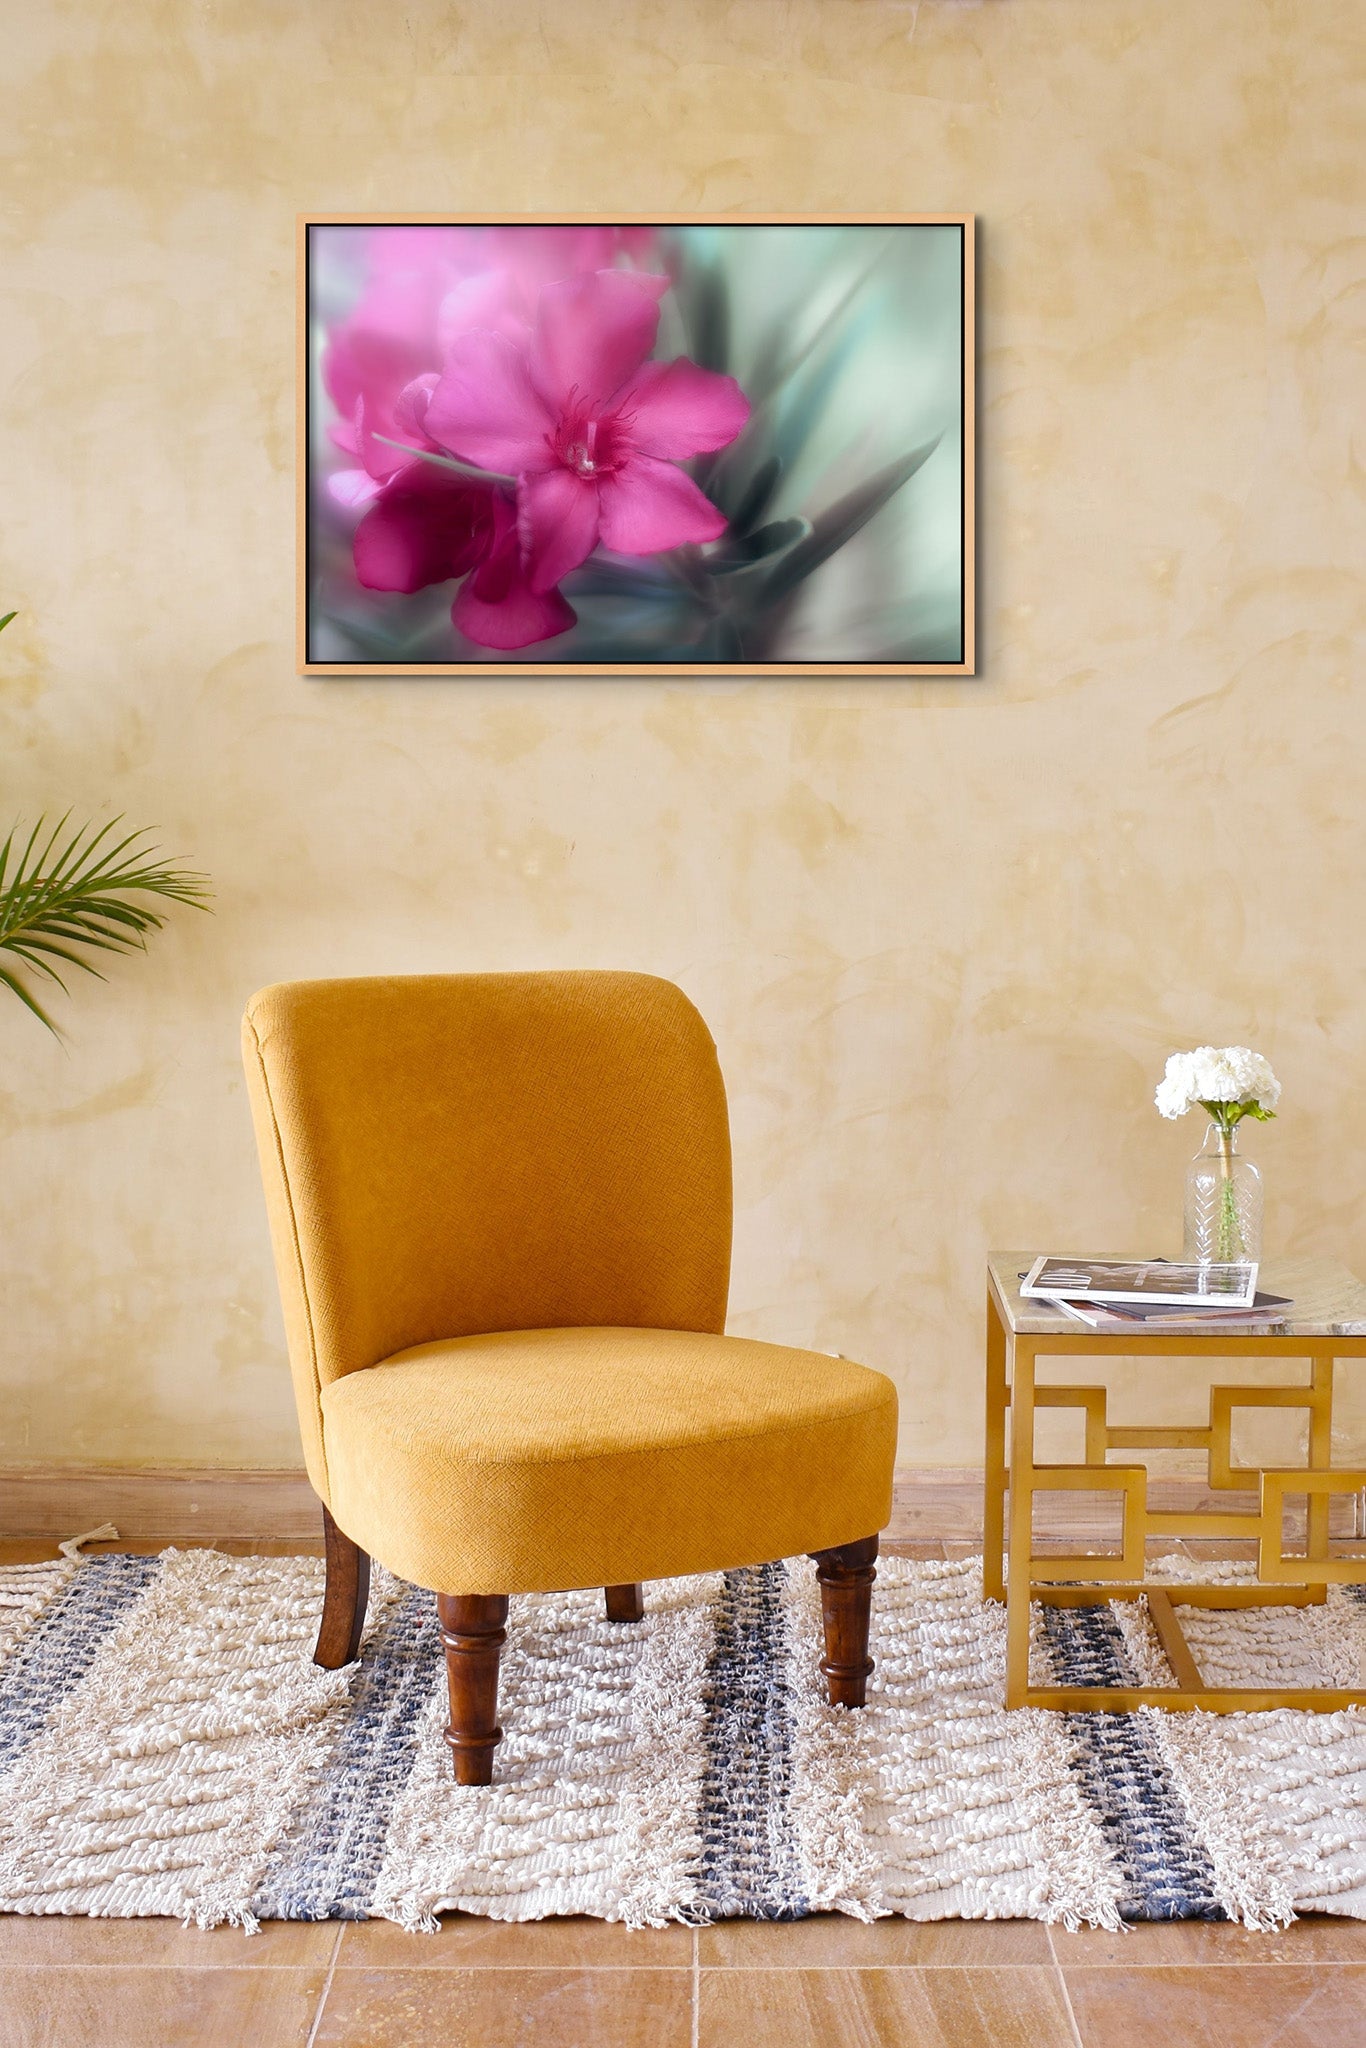 Photography of a red oleander by Cameron Dreaux, printed on metal. Photograph is hanging on the wall of a yellow room. Room has a yellow chair and end table. 